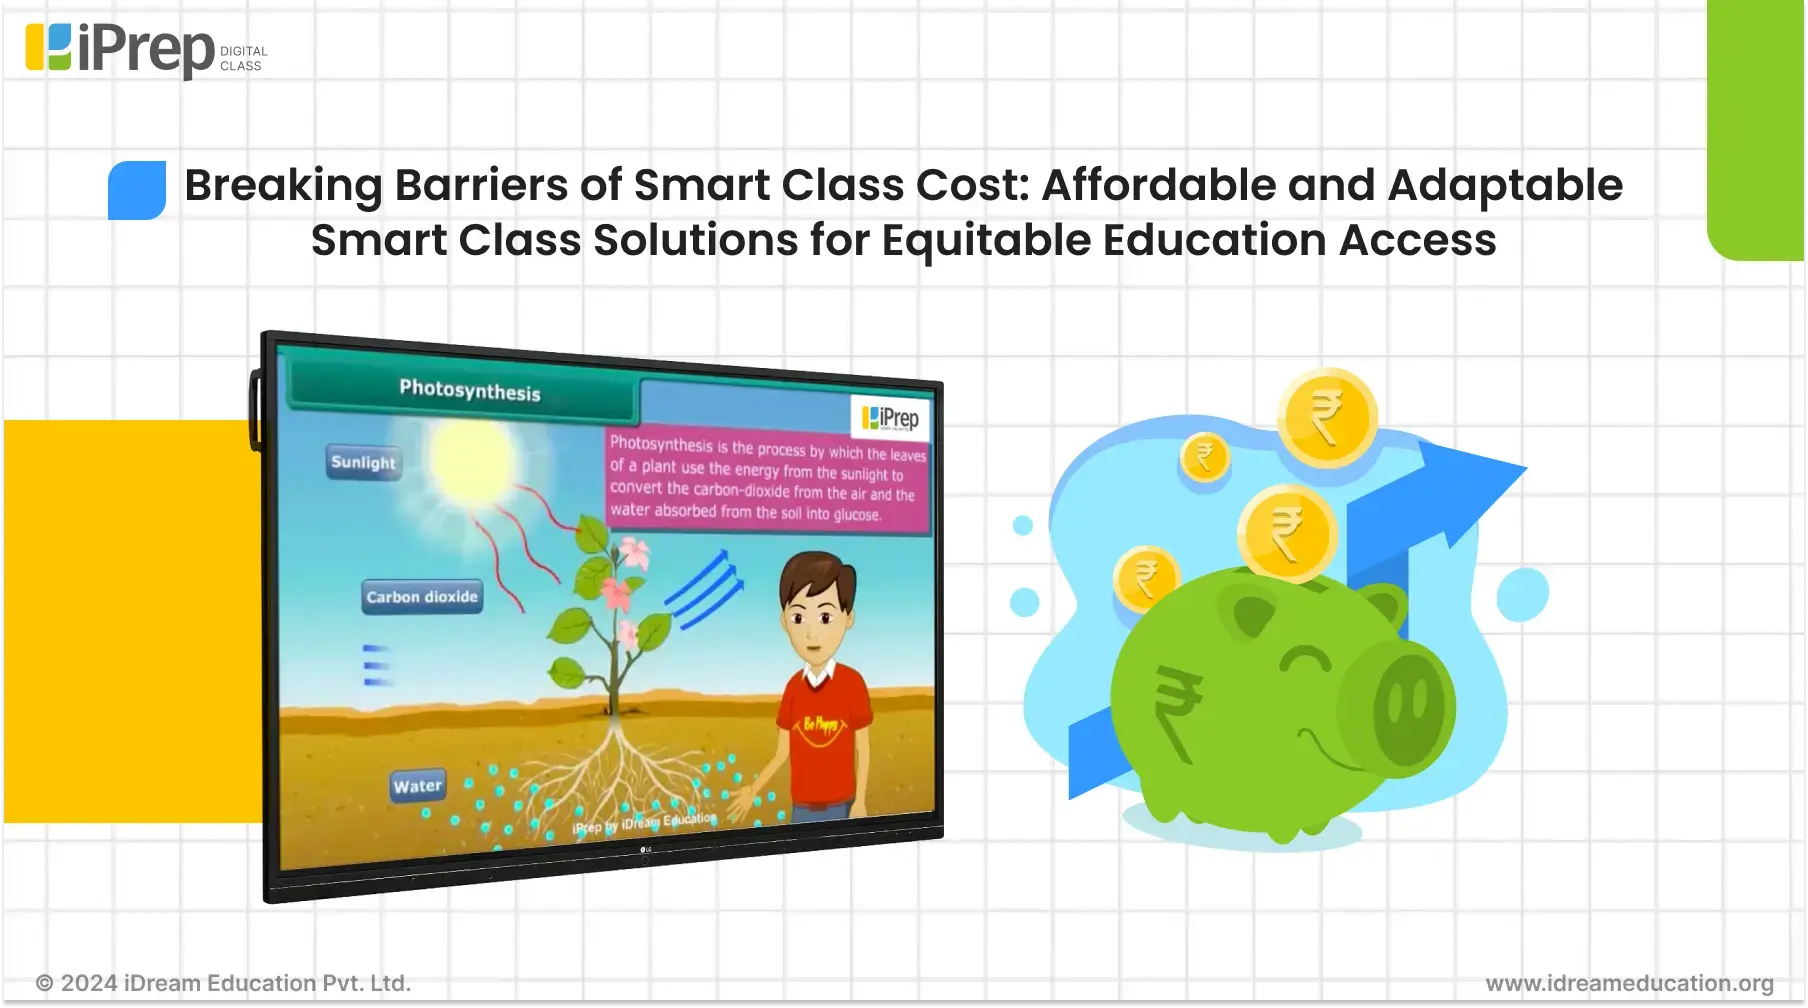 iDream Education's iPrep Digital Class, a smart classroom solution, breaking barriers of smart class cost. It is an easy-to-setup, manage, and use digital solution for schools